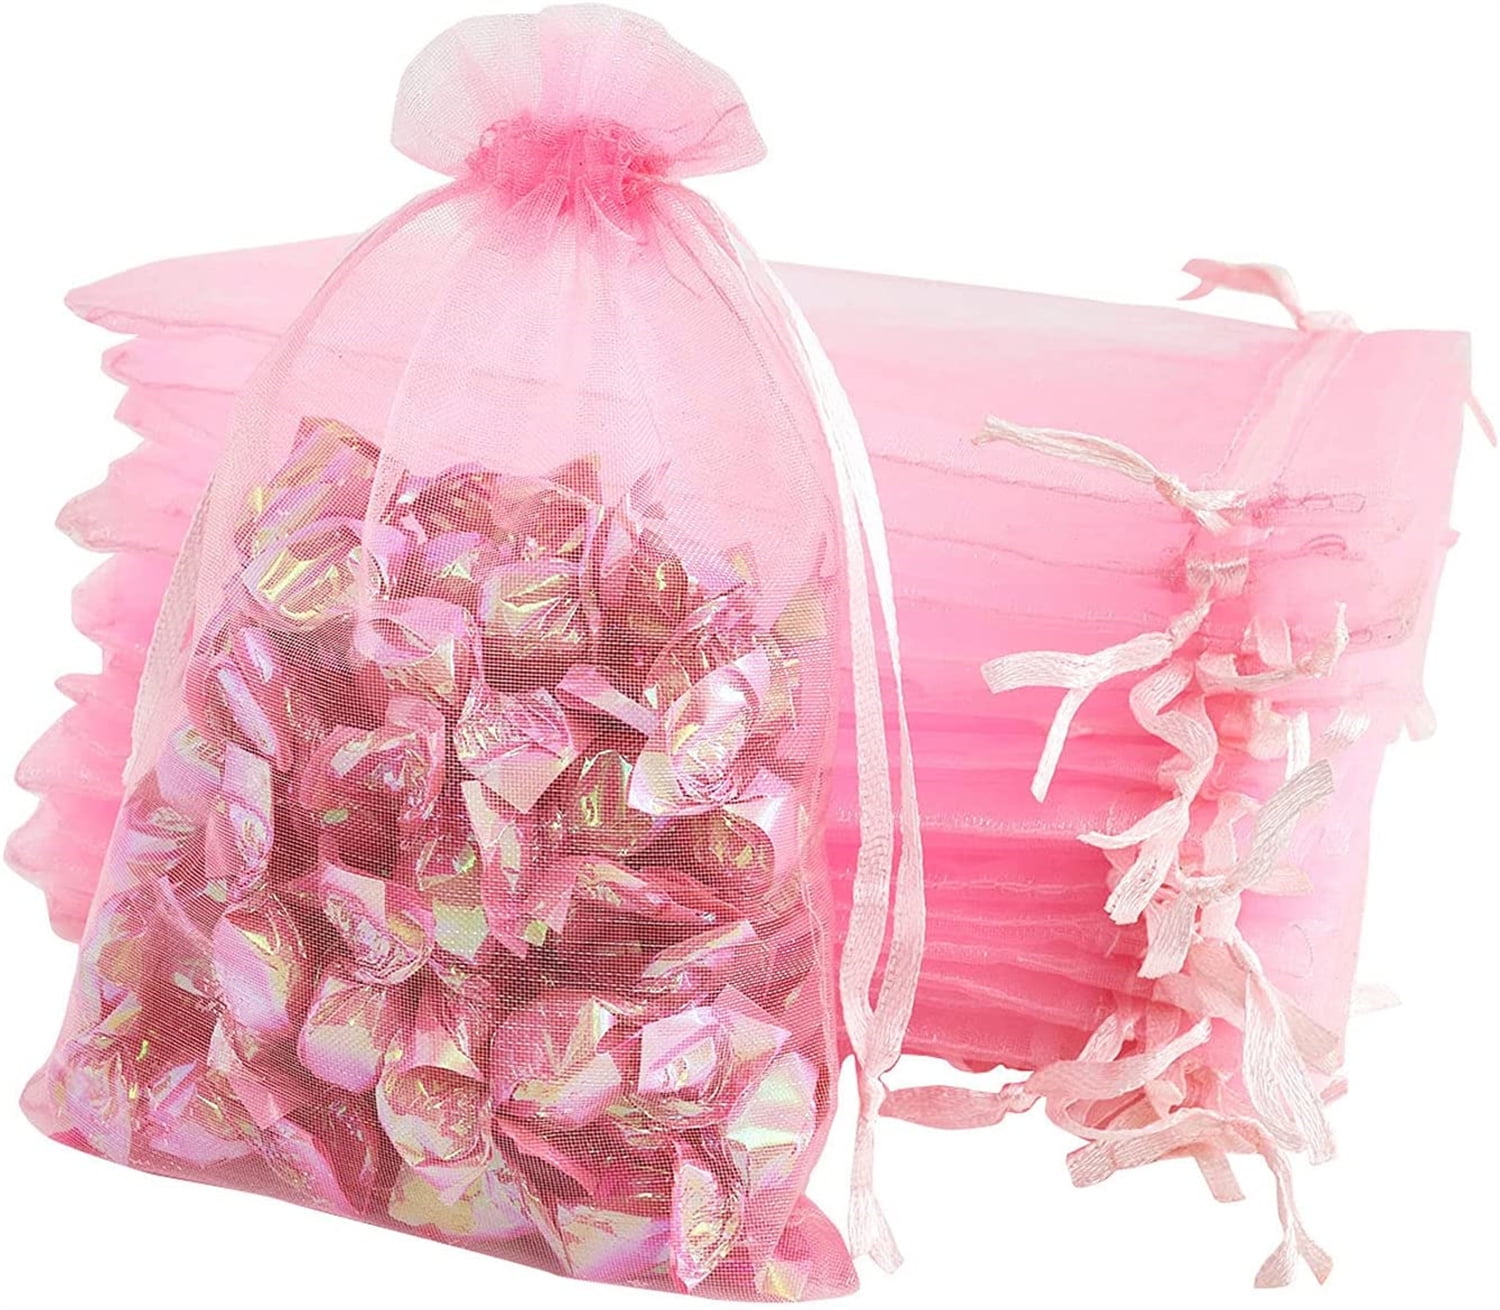 Amazon.com: Ableme Deco Pink Organza Bags 4x6 Inch (100 Pcs) Sheer Mesh  Gift Bags Drawstring Sachet Jewelry Bags Organza Medium Drawstring Pouch  for Wedding Favor, Party, Soaps, Baby Shower Gifts : Health